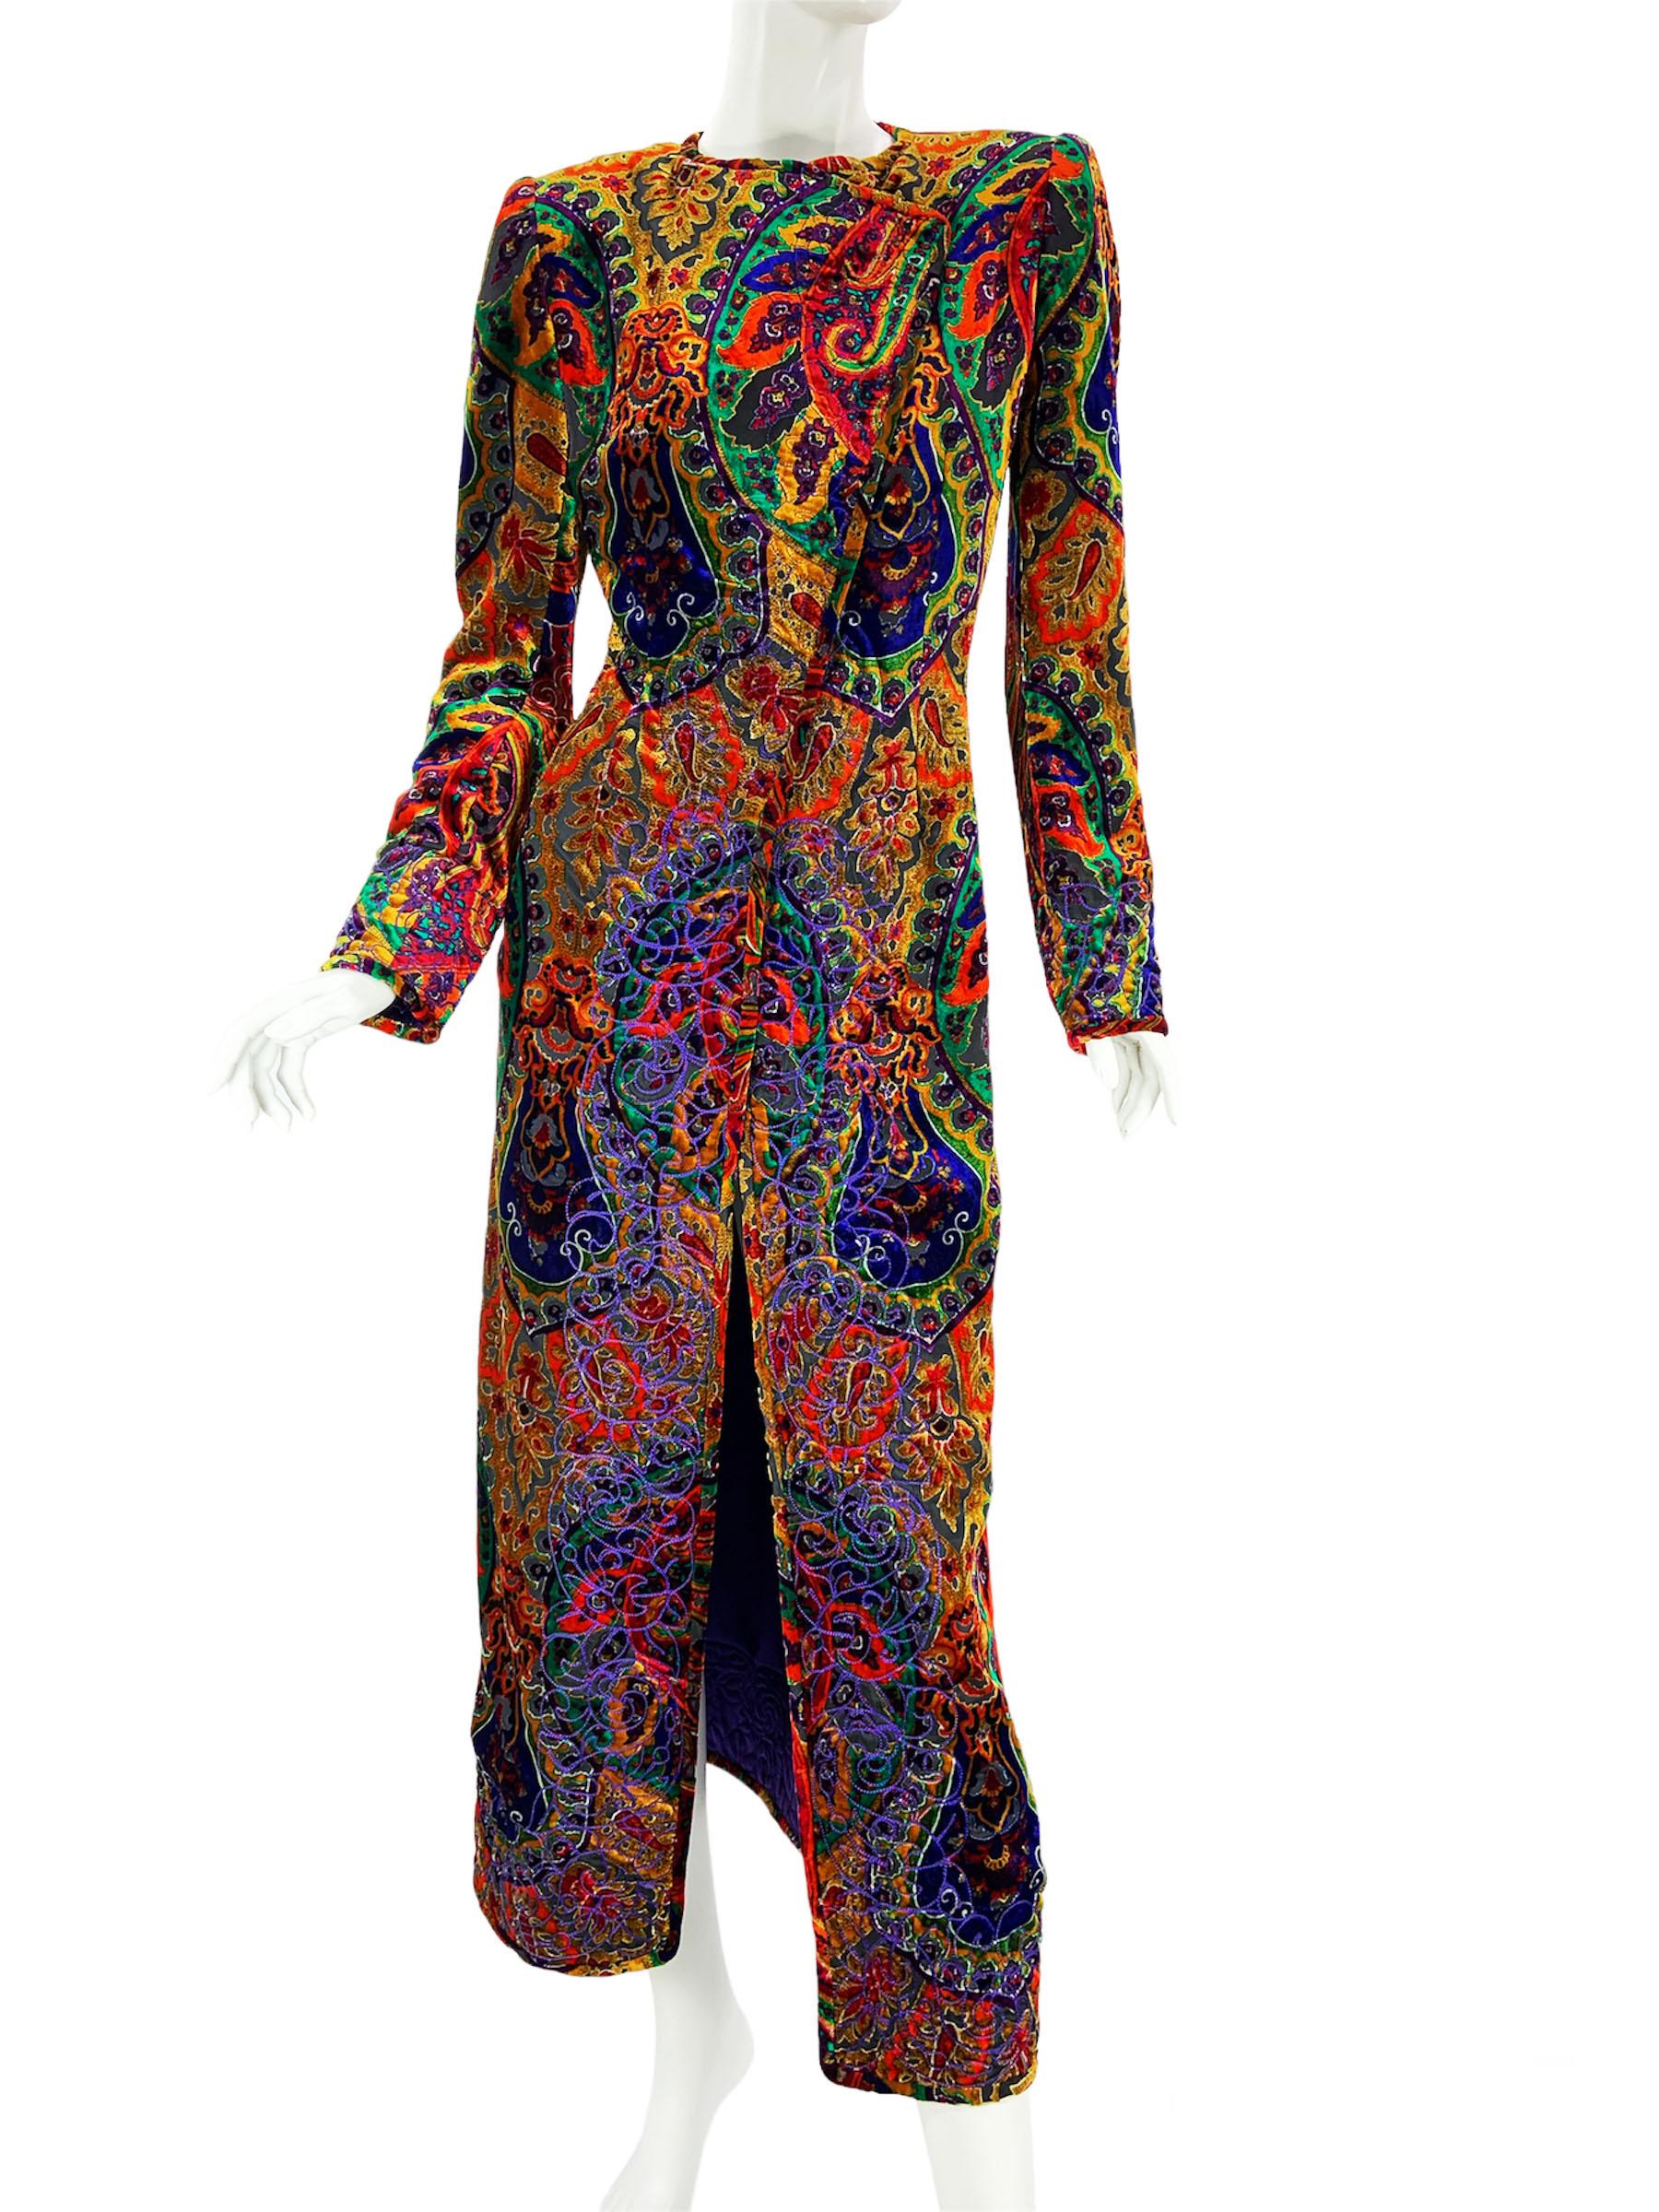 Vintage 90's Oscar de la Renta Velvet Fitted Long Coat
US size - 6
Amazingly colorful Devoré ( burnout ) velvet embellished also with the purple embroidery.
Fitted style, Snaps closure, Fully lined in purple silk, Padded shoulders.
Measurements: